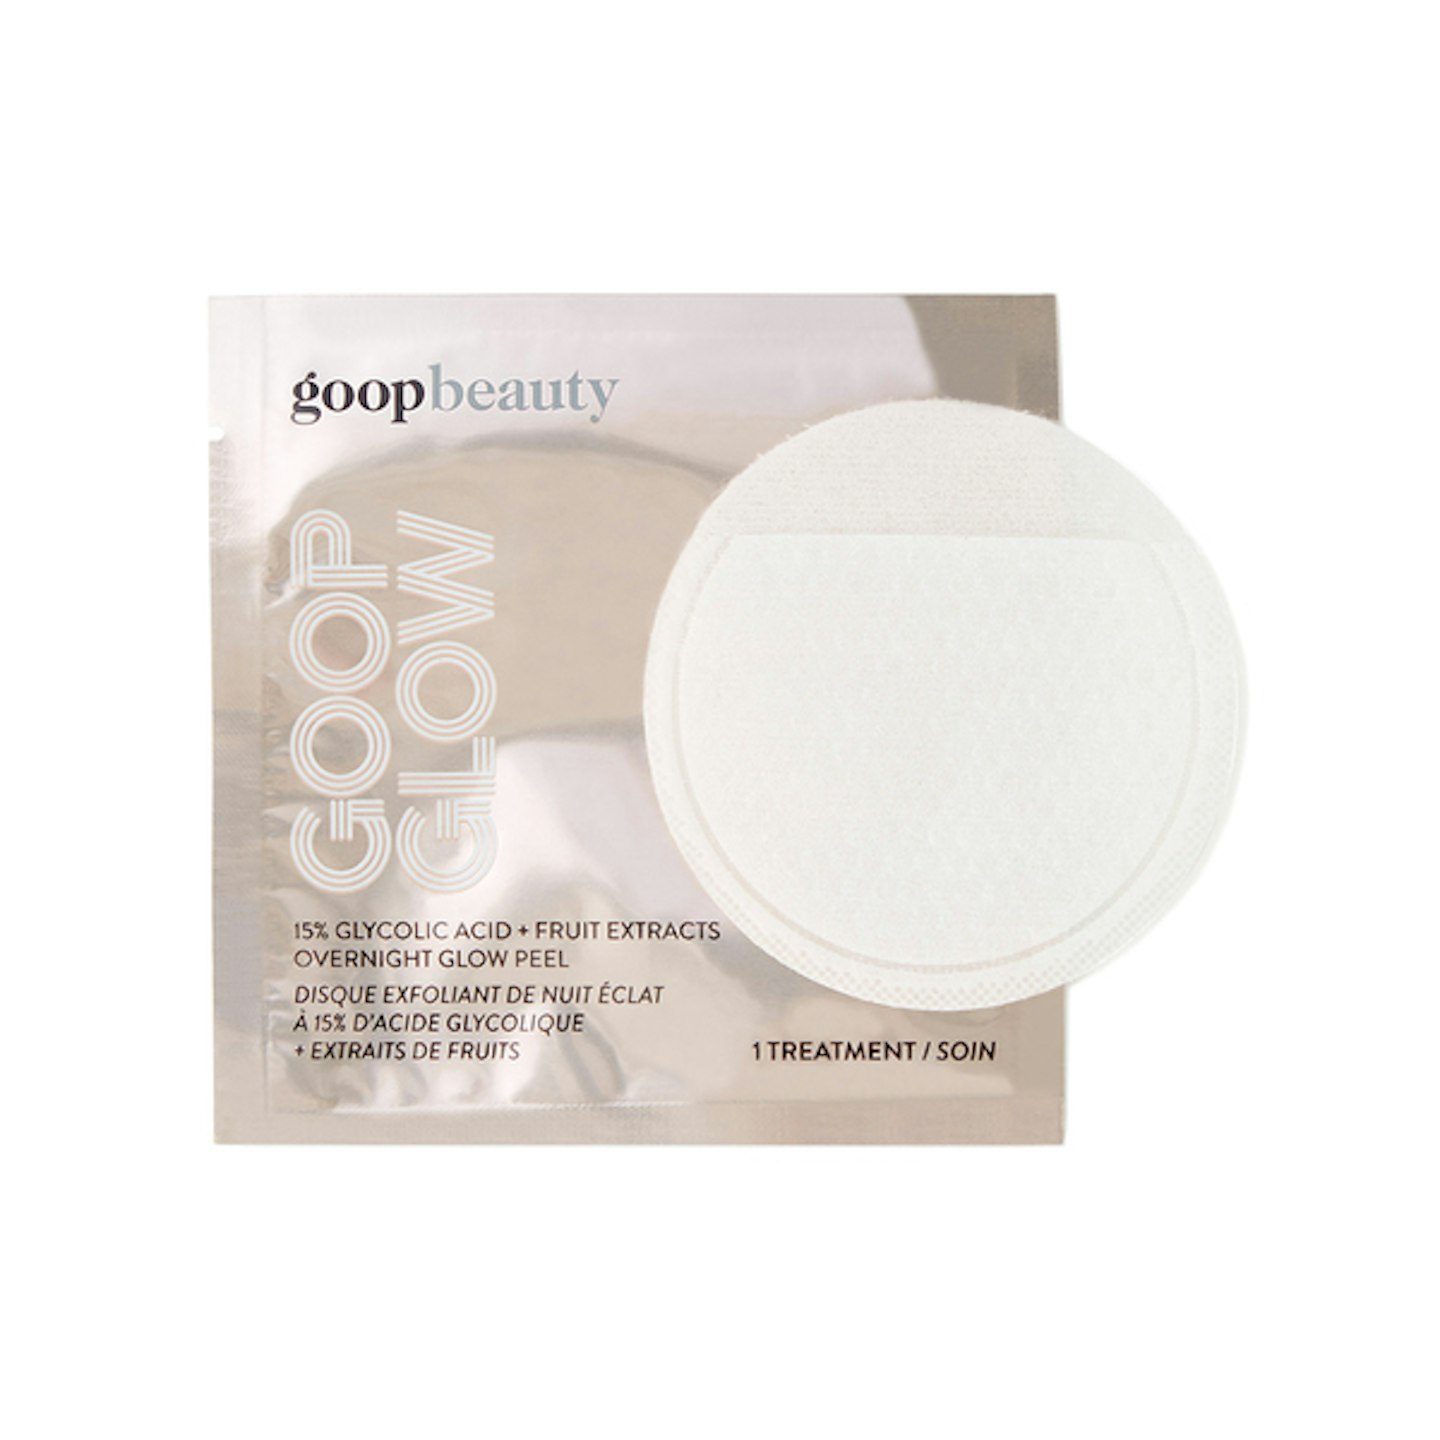 Goop Glow 15% Glycolic Acid + Fruit Extracts Overnight Glow Peel, £38 for 4